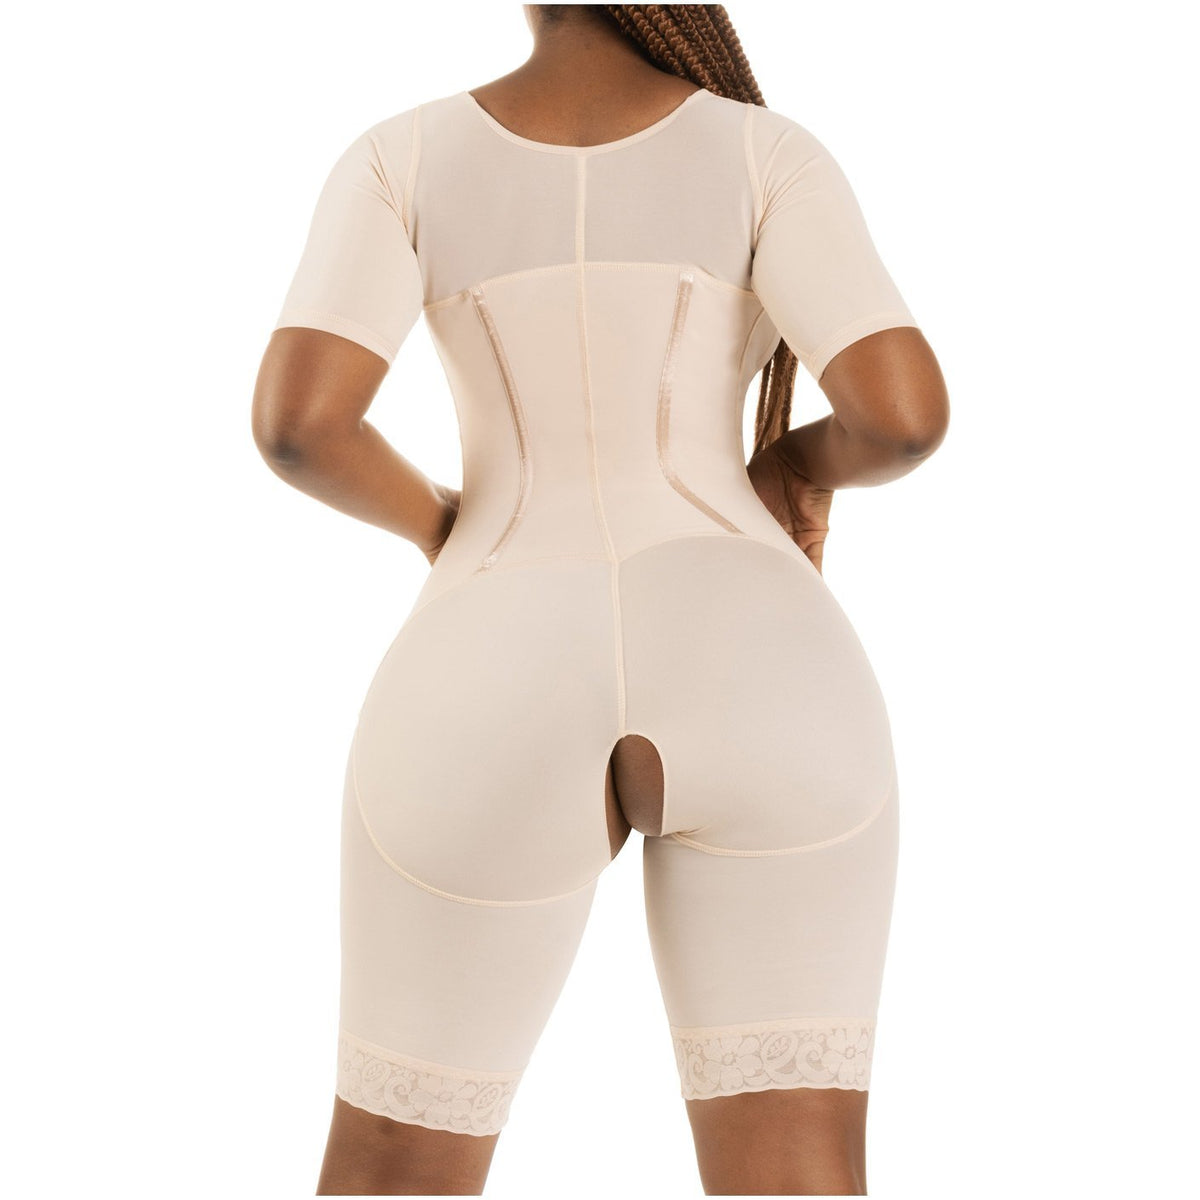 Bling Shapers 938BF Compression Garment With Sleeves and Built-in